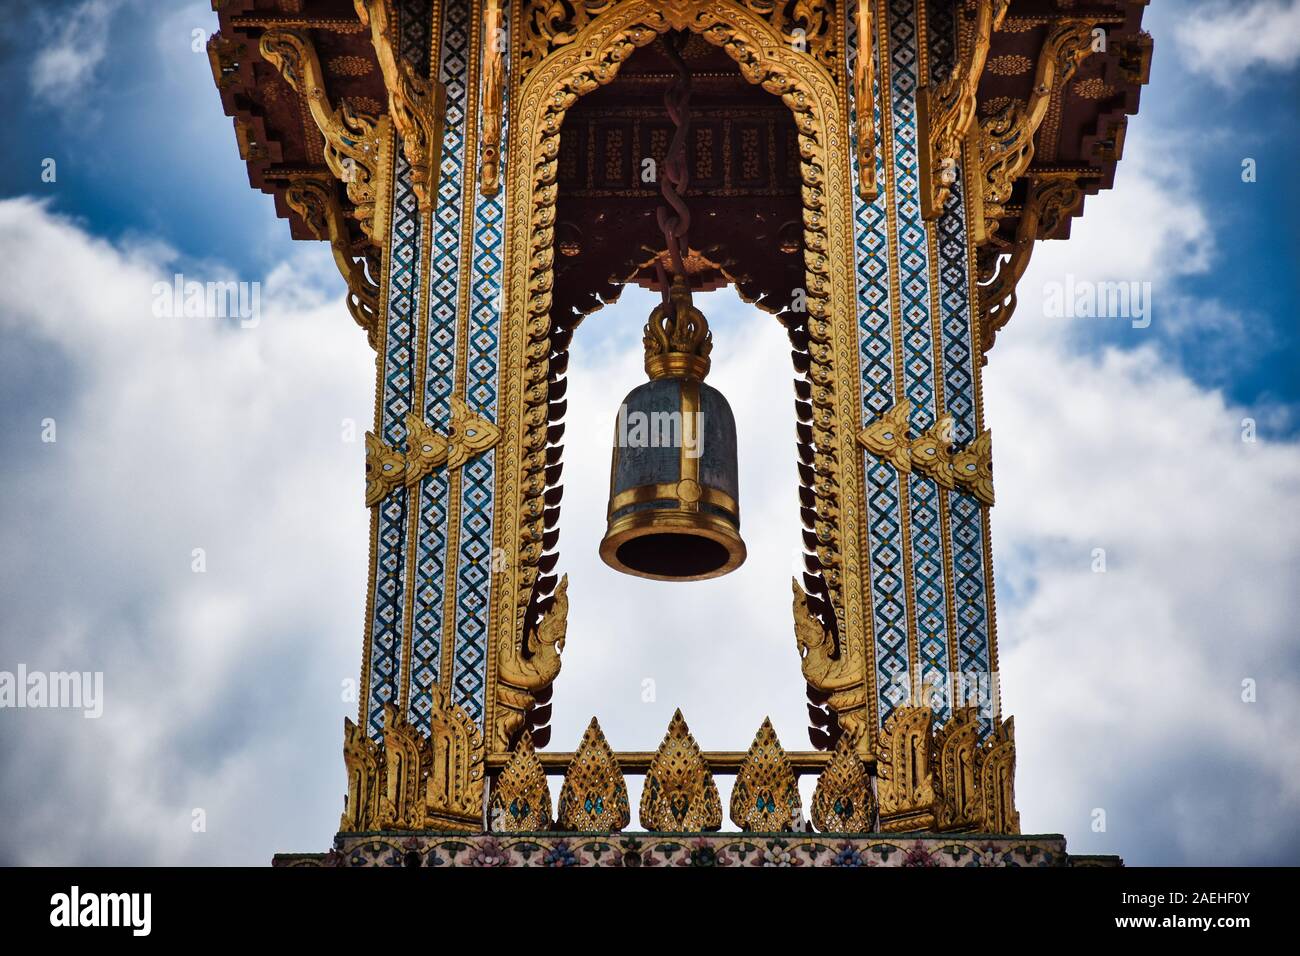 Bangkok, Thailand 11.24.2019: A Thai traditional bell tower (belfry) with detailed, mosaic artwork and gold colored design at Wat Phra Kaew (Temple of Stock Photo